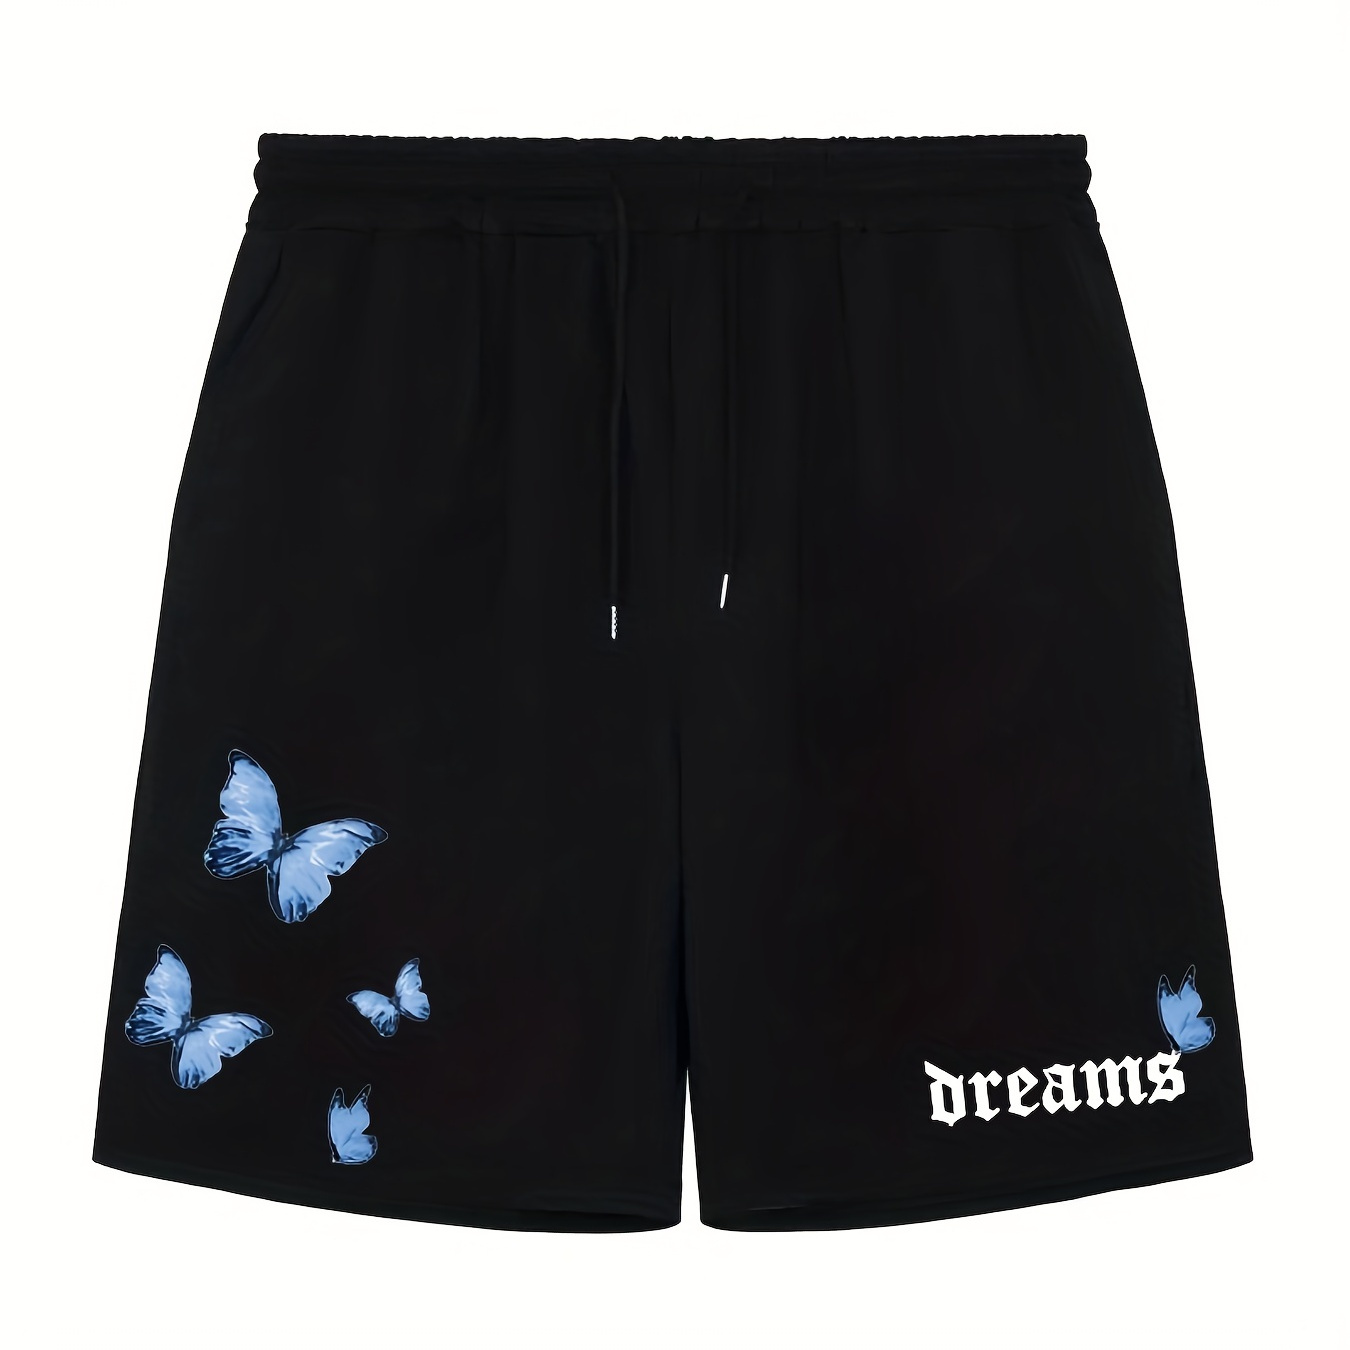 

Butterfly Dreams Comfy Shorts, Men's Casual Solid Color Slightly Stretch Elastic Waist Drawstring Shorts For Summer